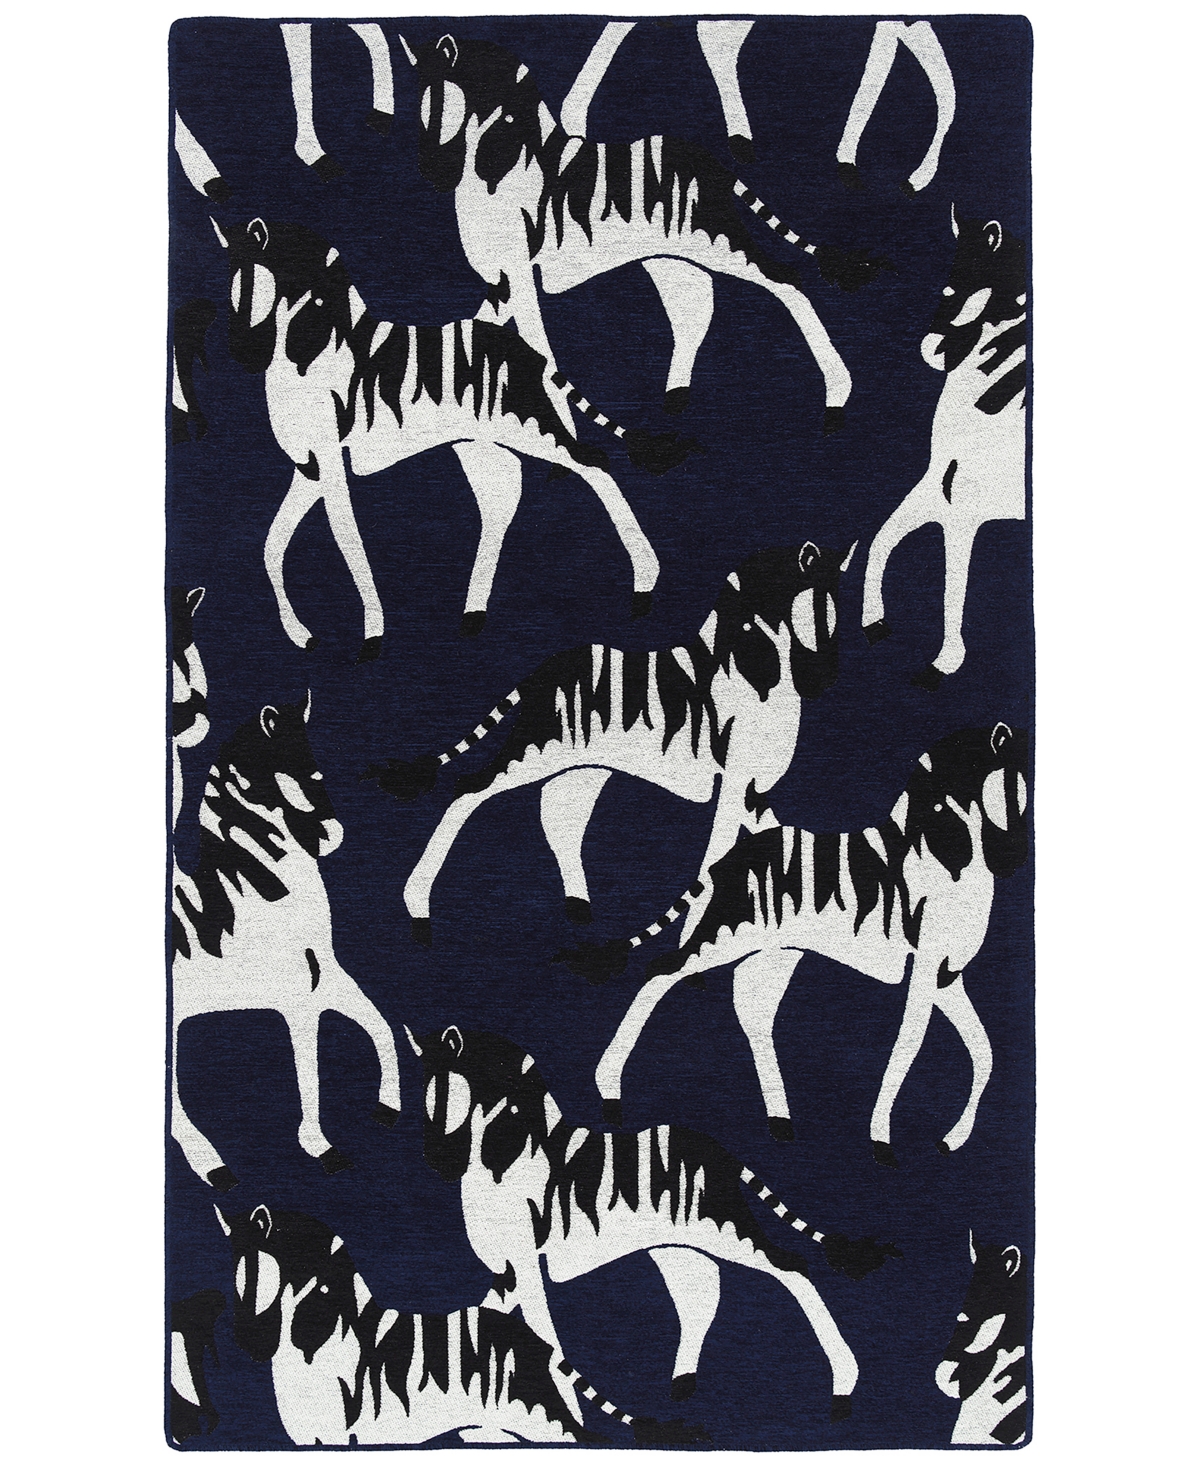 Hilary Farr Forever Fauna Hfa02-38 2' X 3' Area Rug In Navy